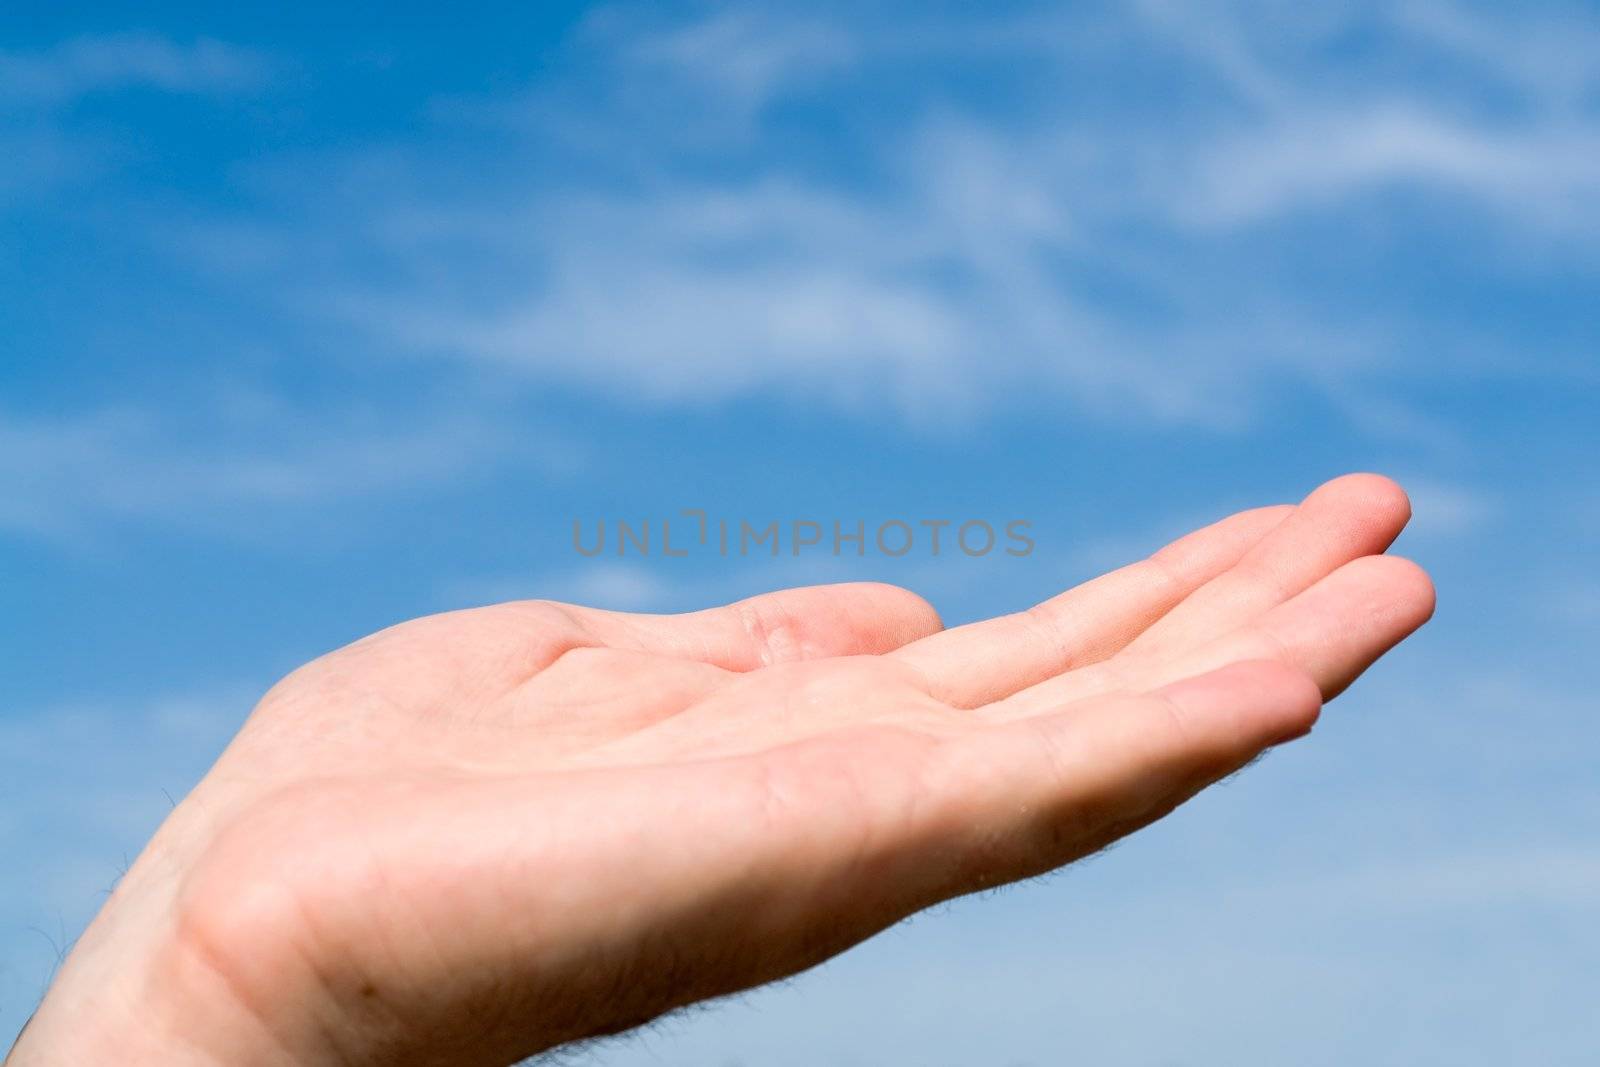 support. hand gesture with blue sky at background